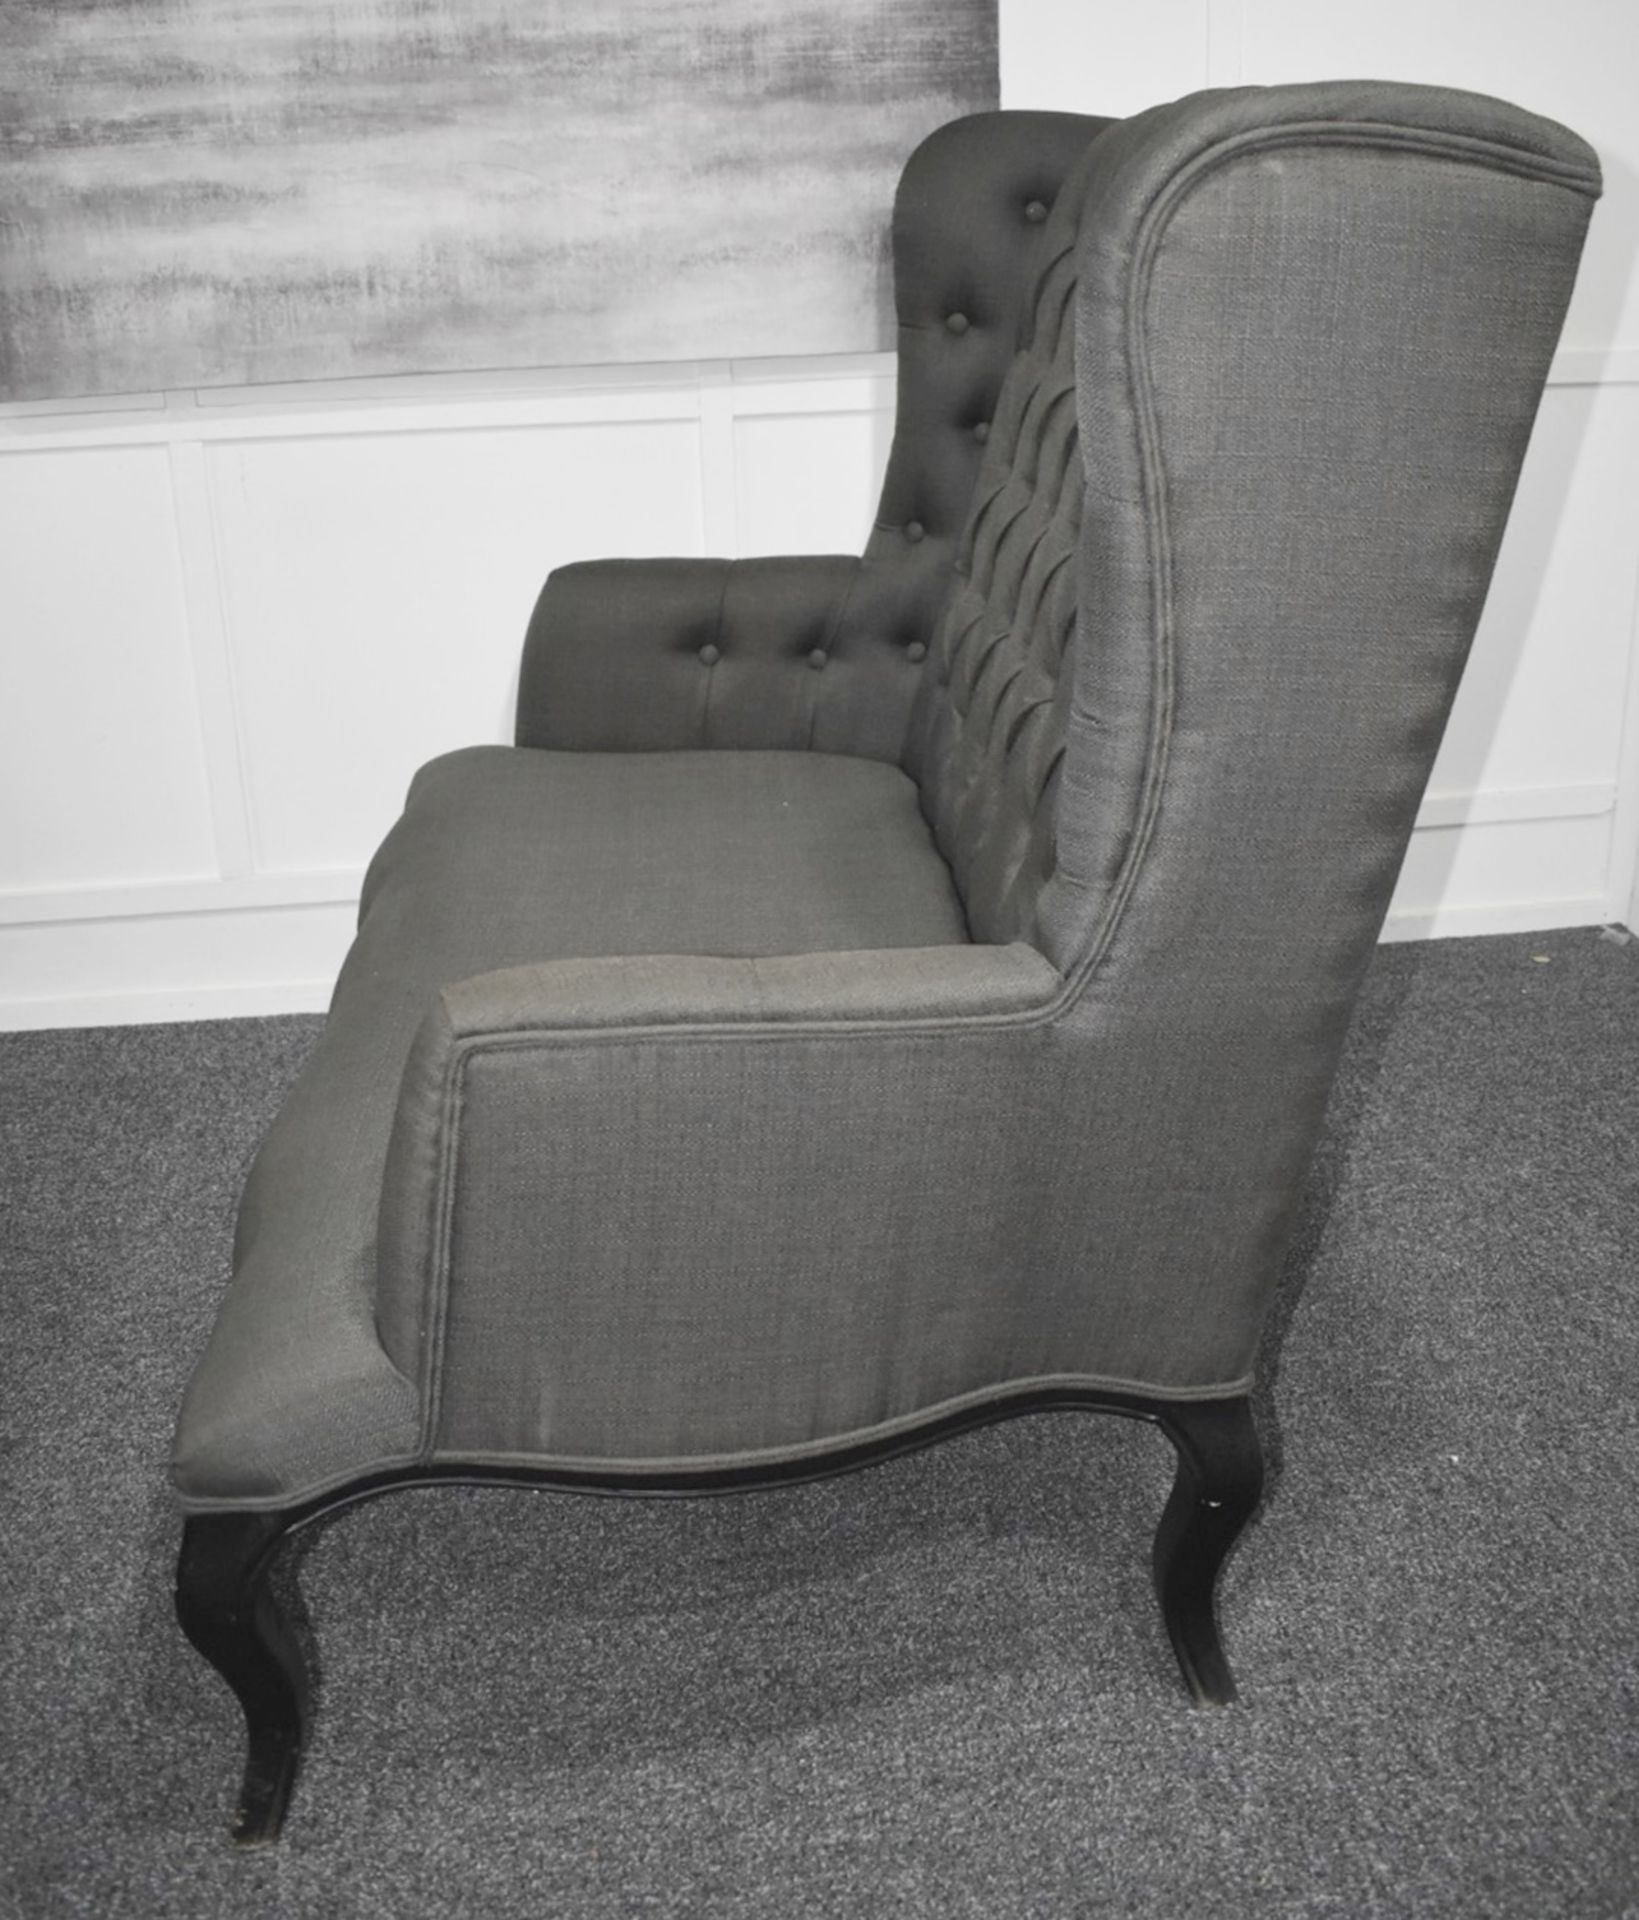 1 x Designer Brand Buttoned Upholstered High-back Loveseat Armchair in a Light Grey Premium Fabric - Image 4 of 10